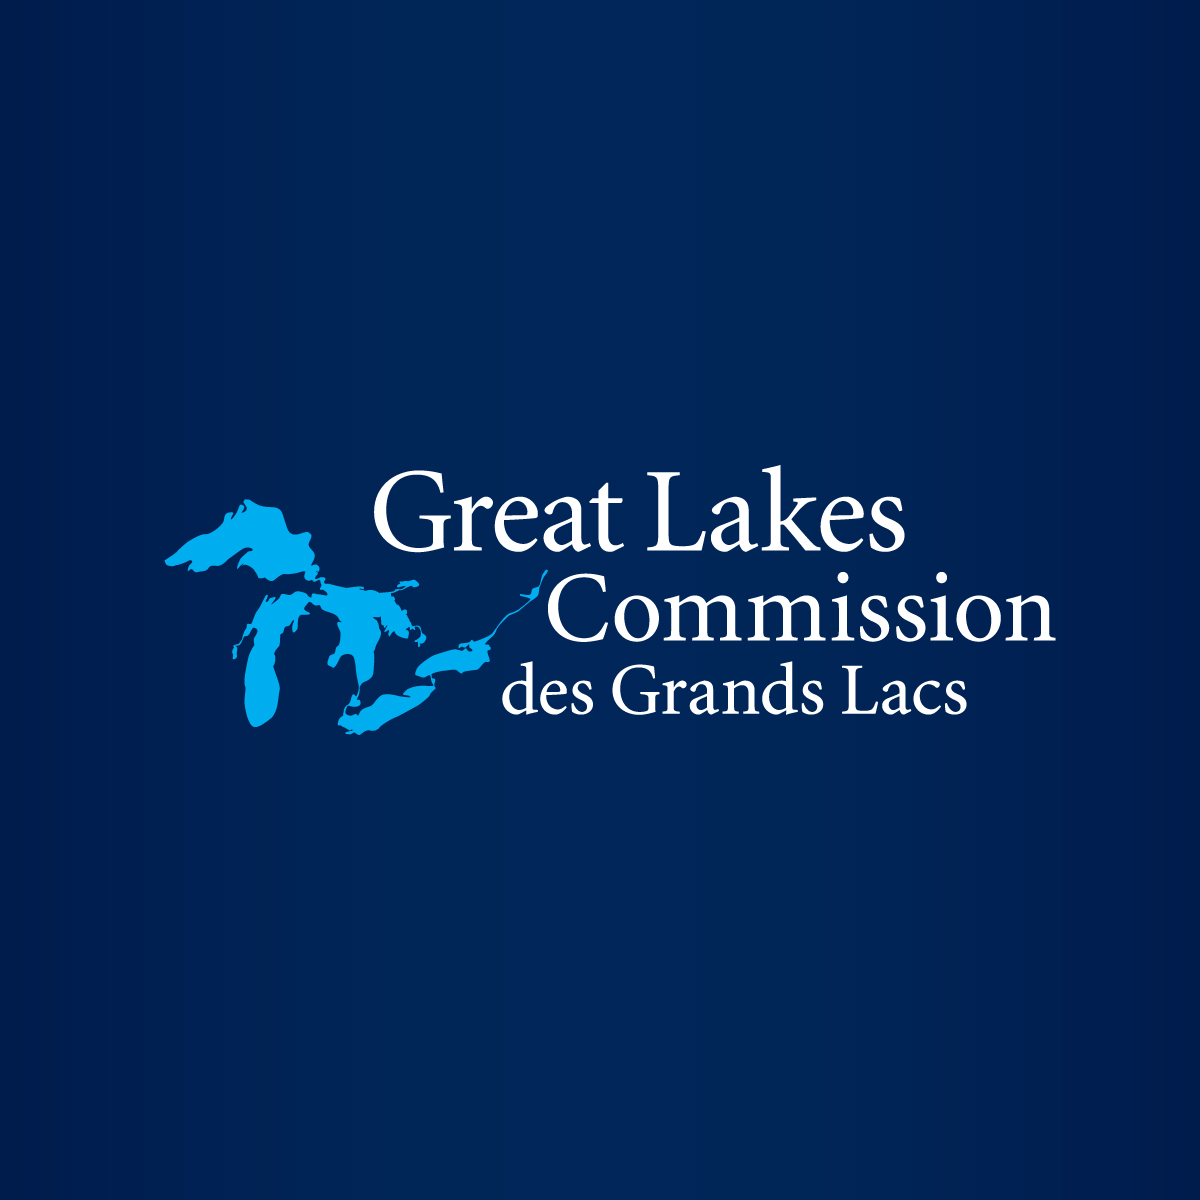 MI environmental groups oppose oil pipeline project under Great Lakes